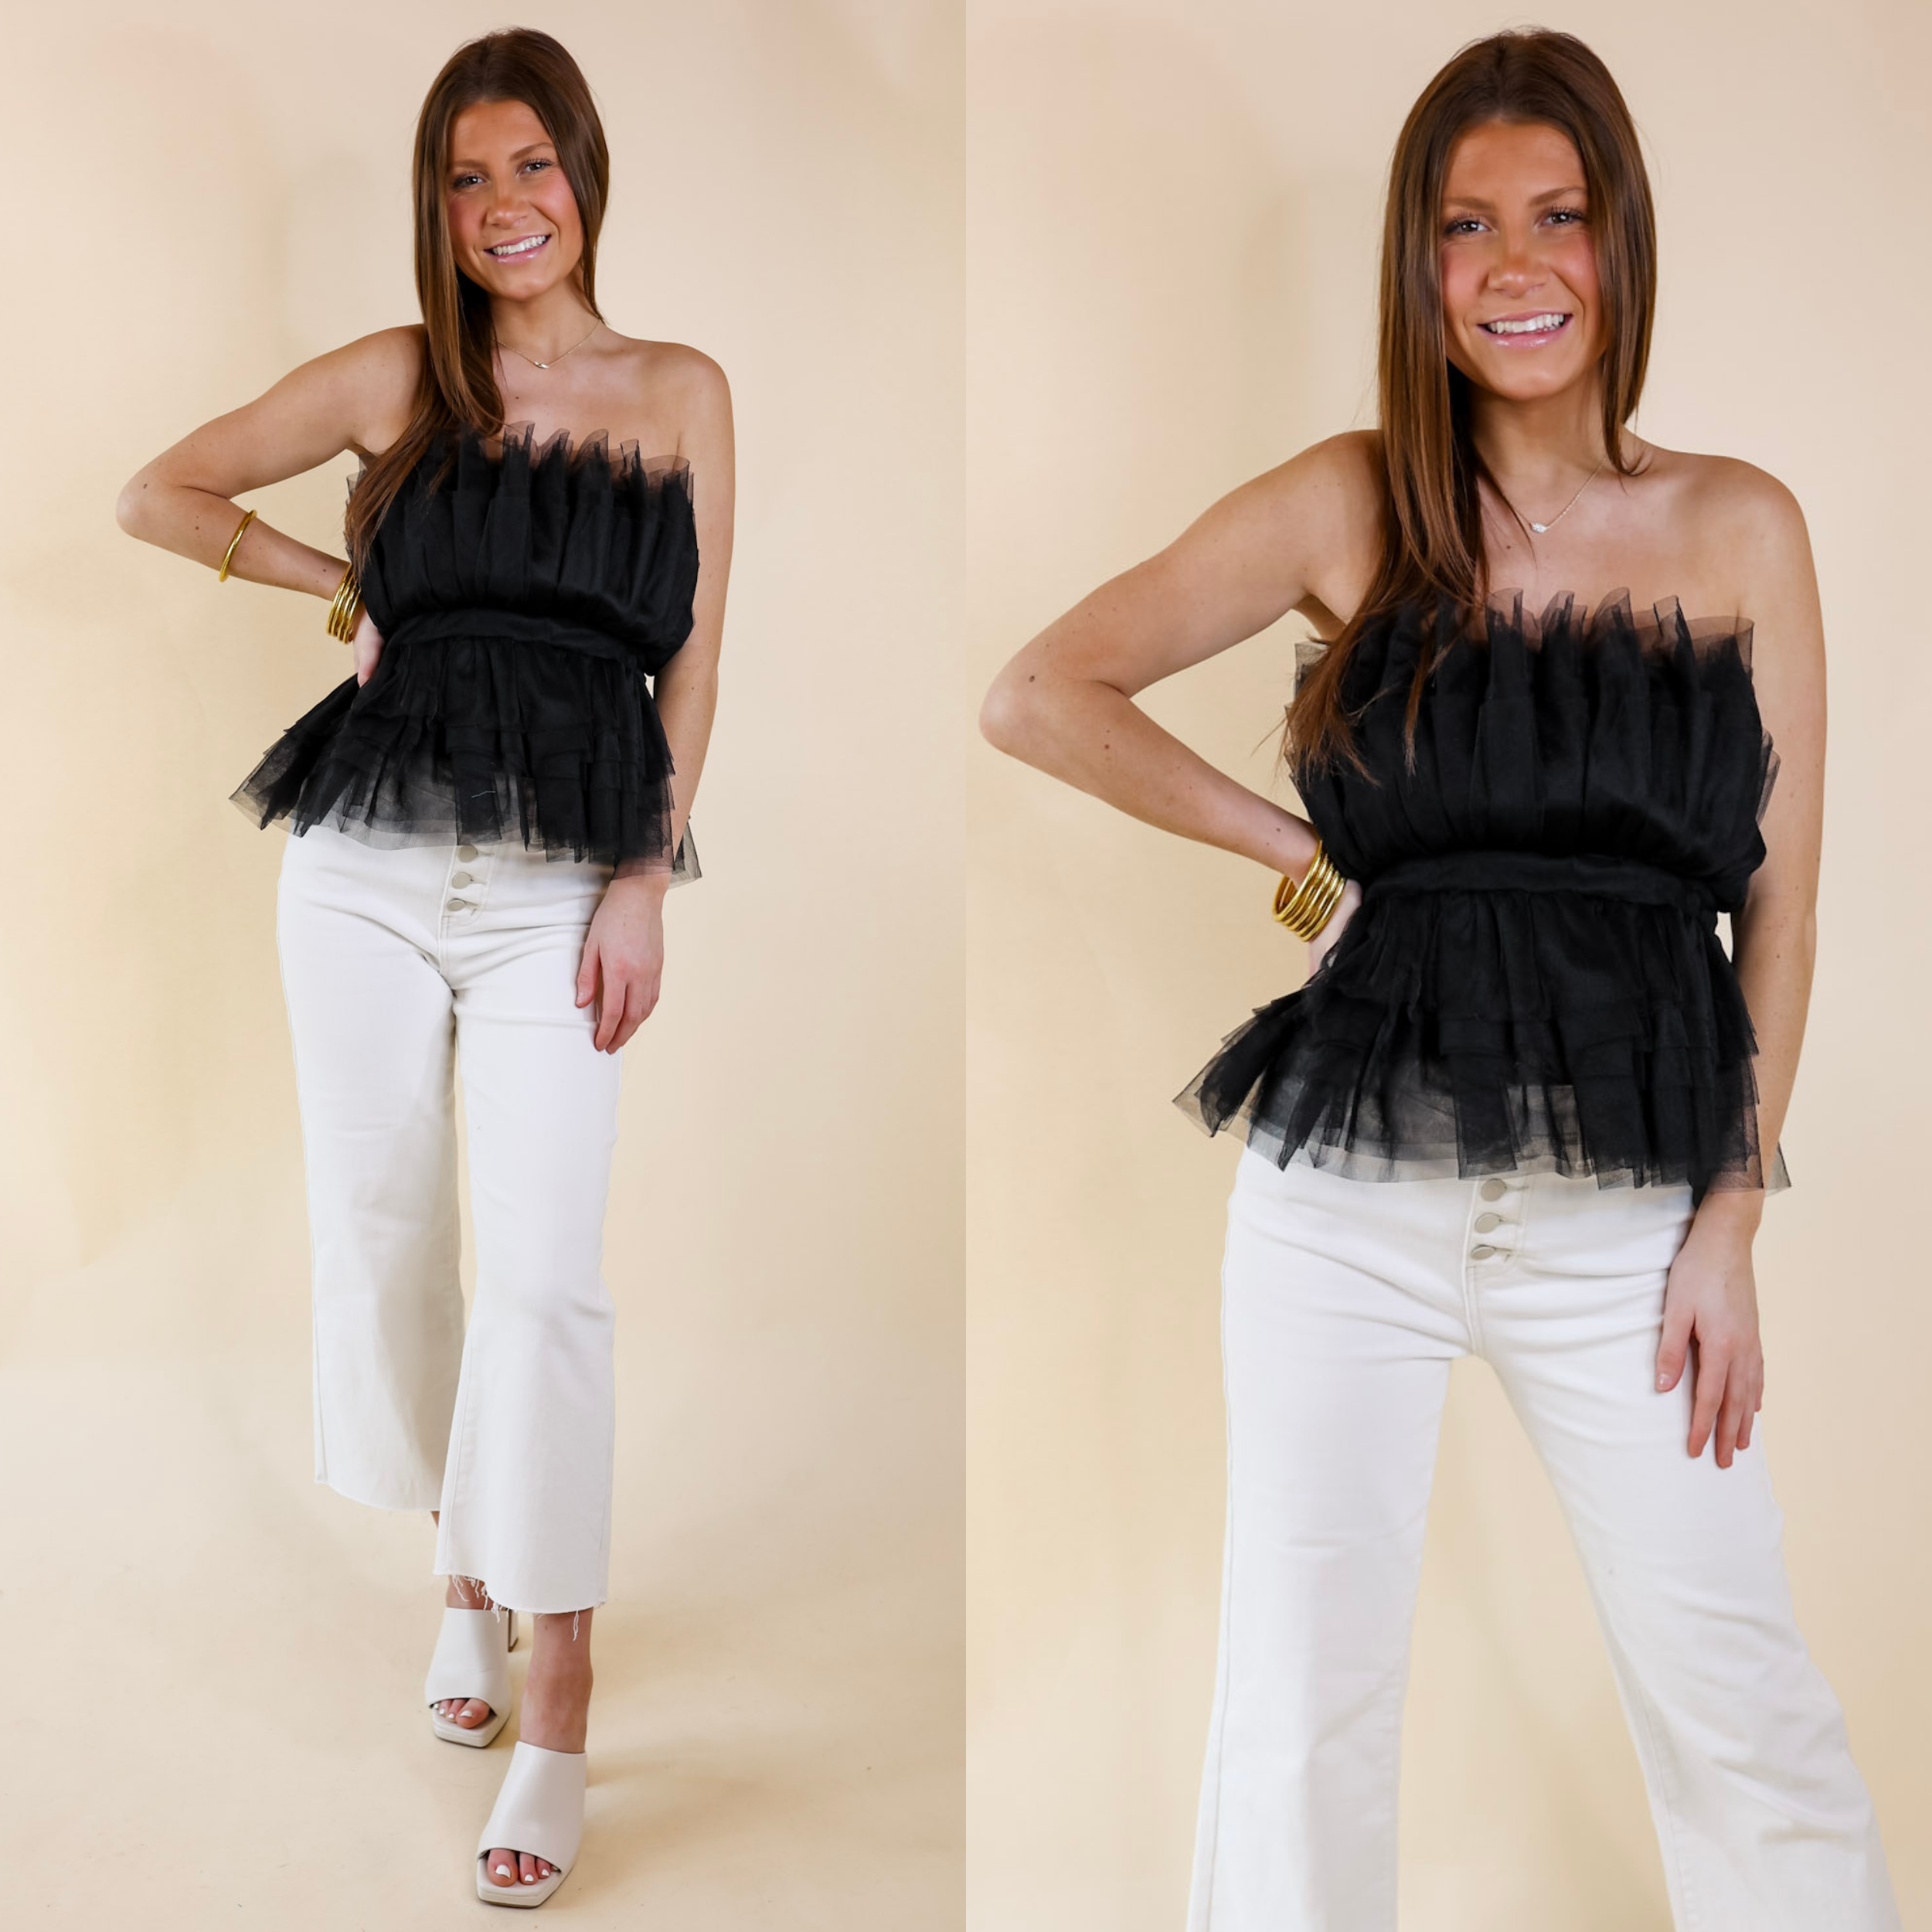 Model is wearing a strapless top made of tulle ruffles that is black. Model has this top paired with white jeans, ivory heels, and gold jewelry.